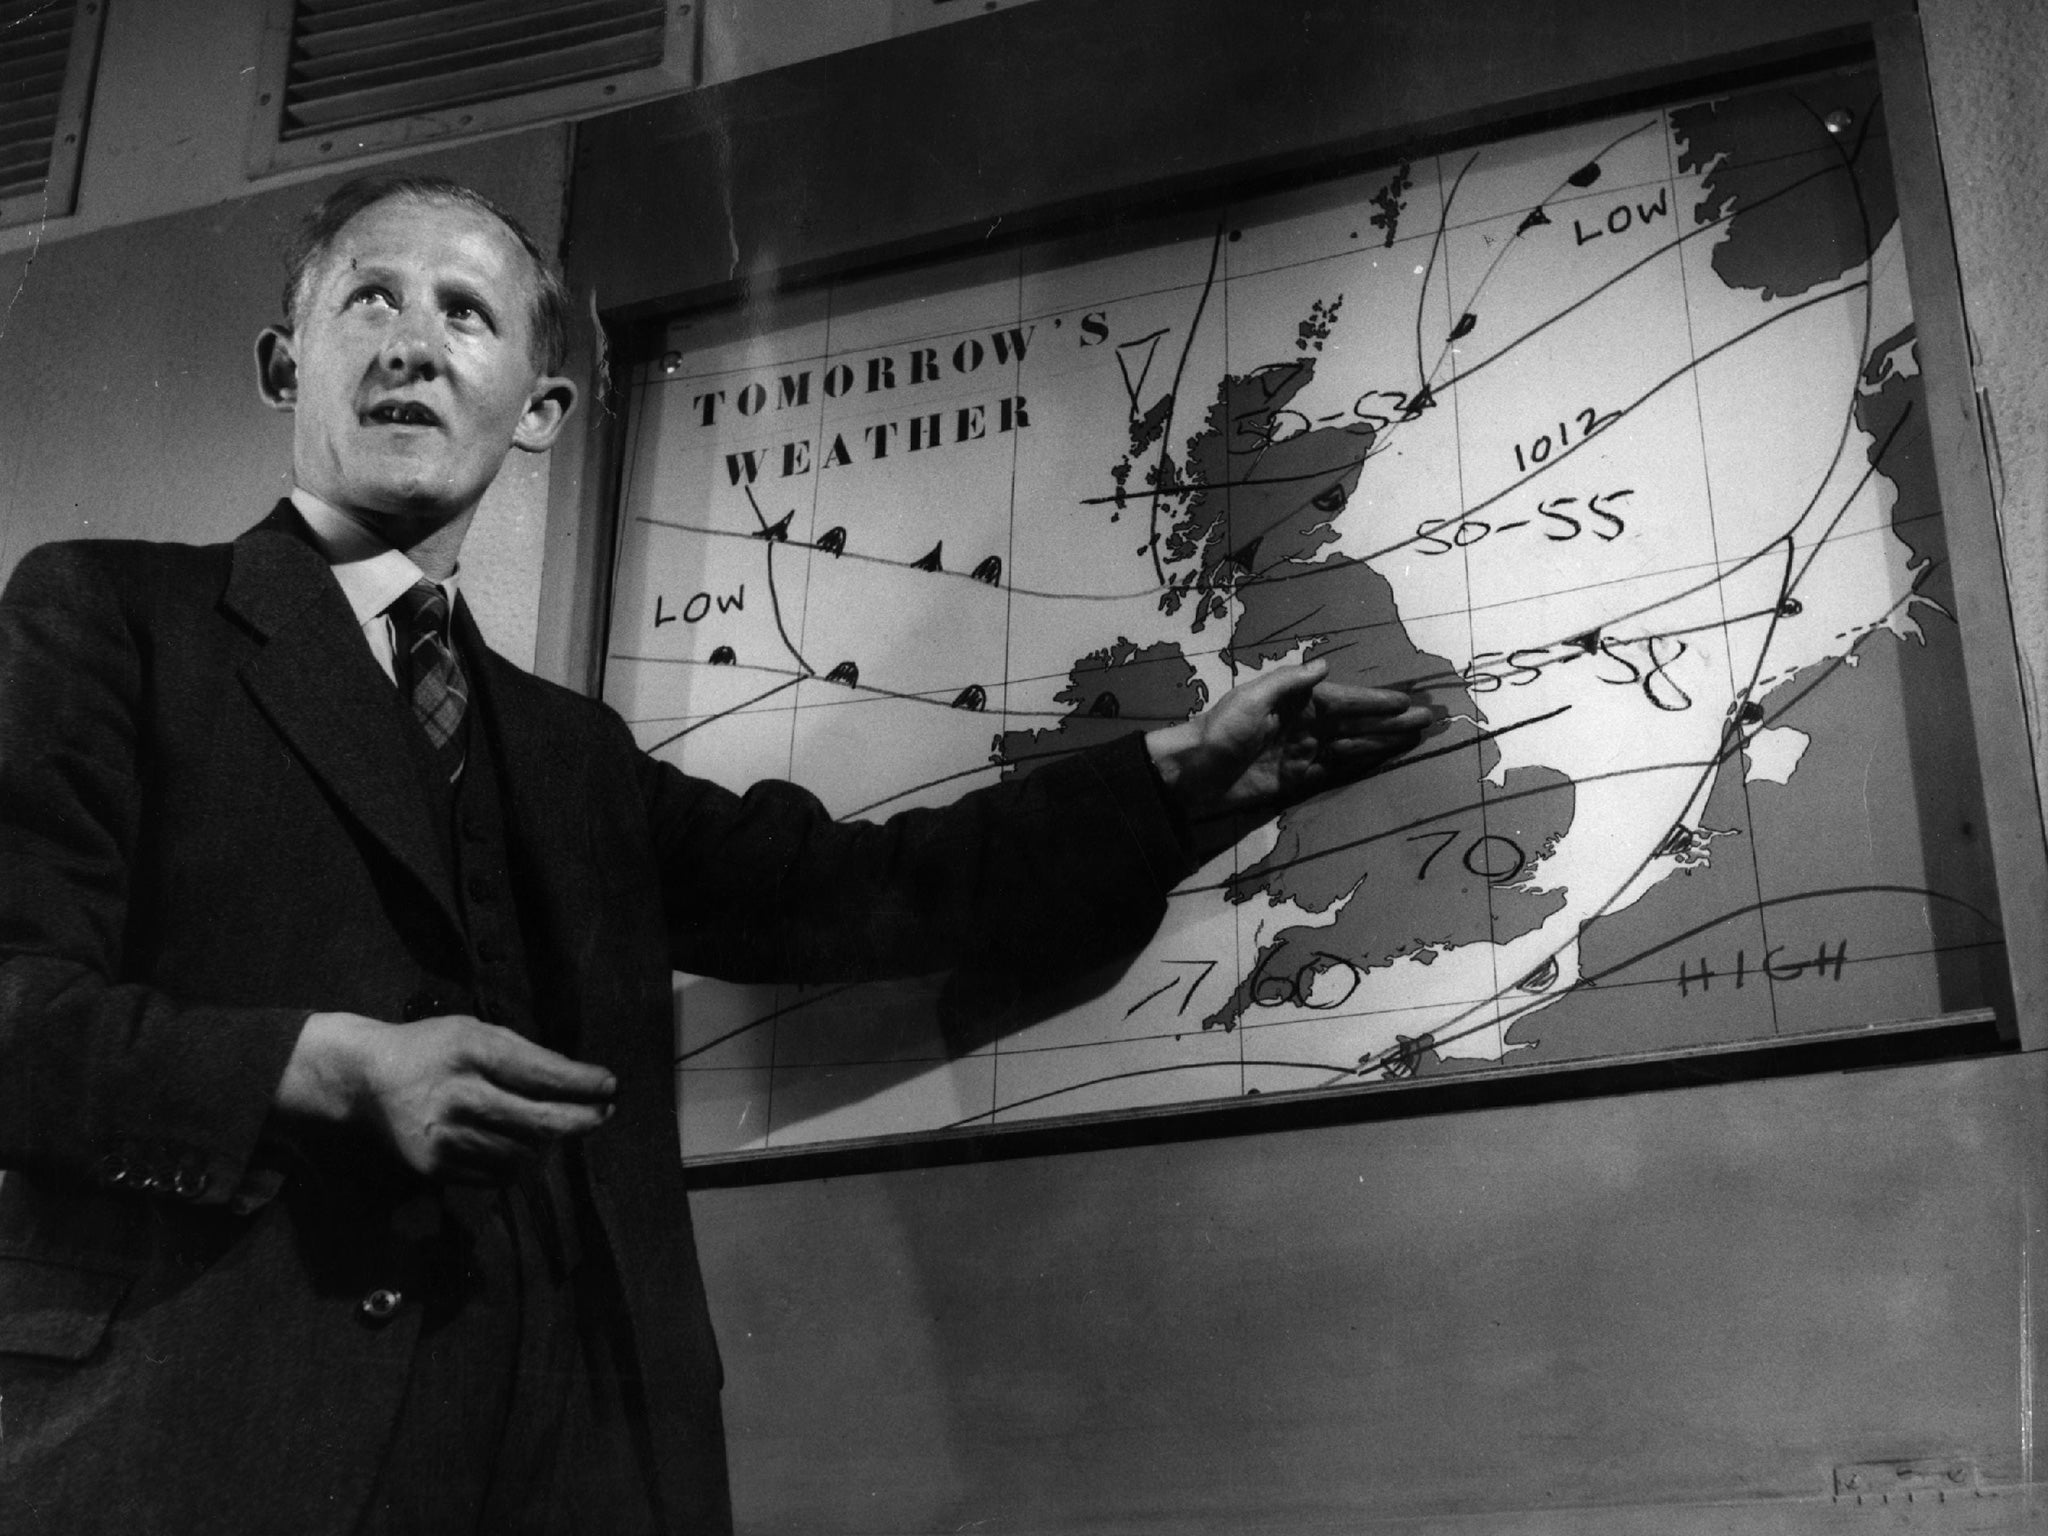 3rd July 1954: A weather forecast transmission from the BBC television studios at Lime Grove, London